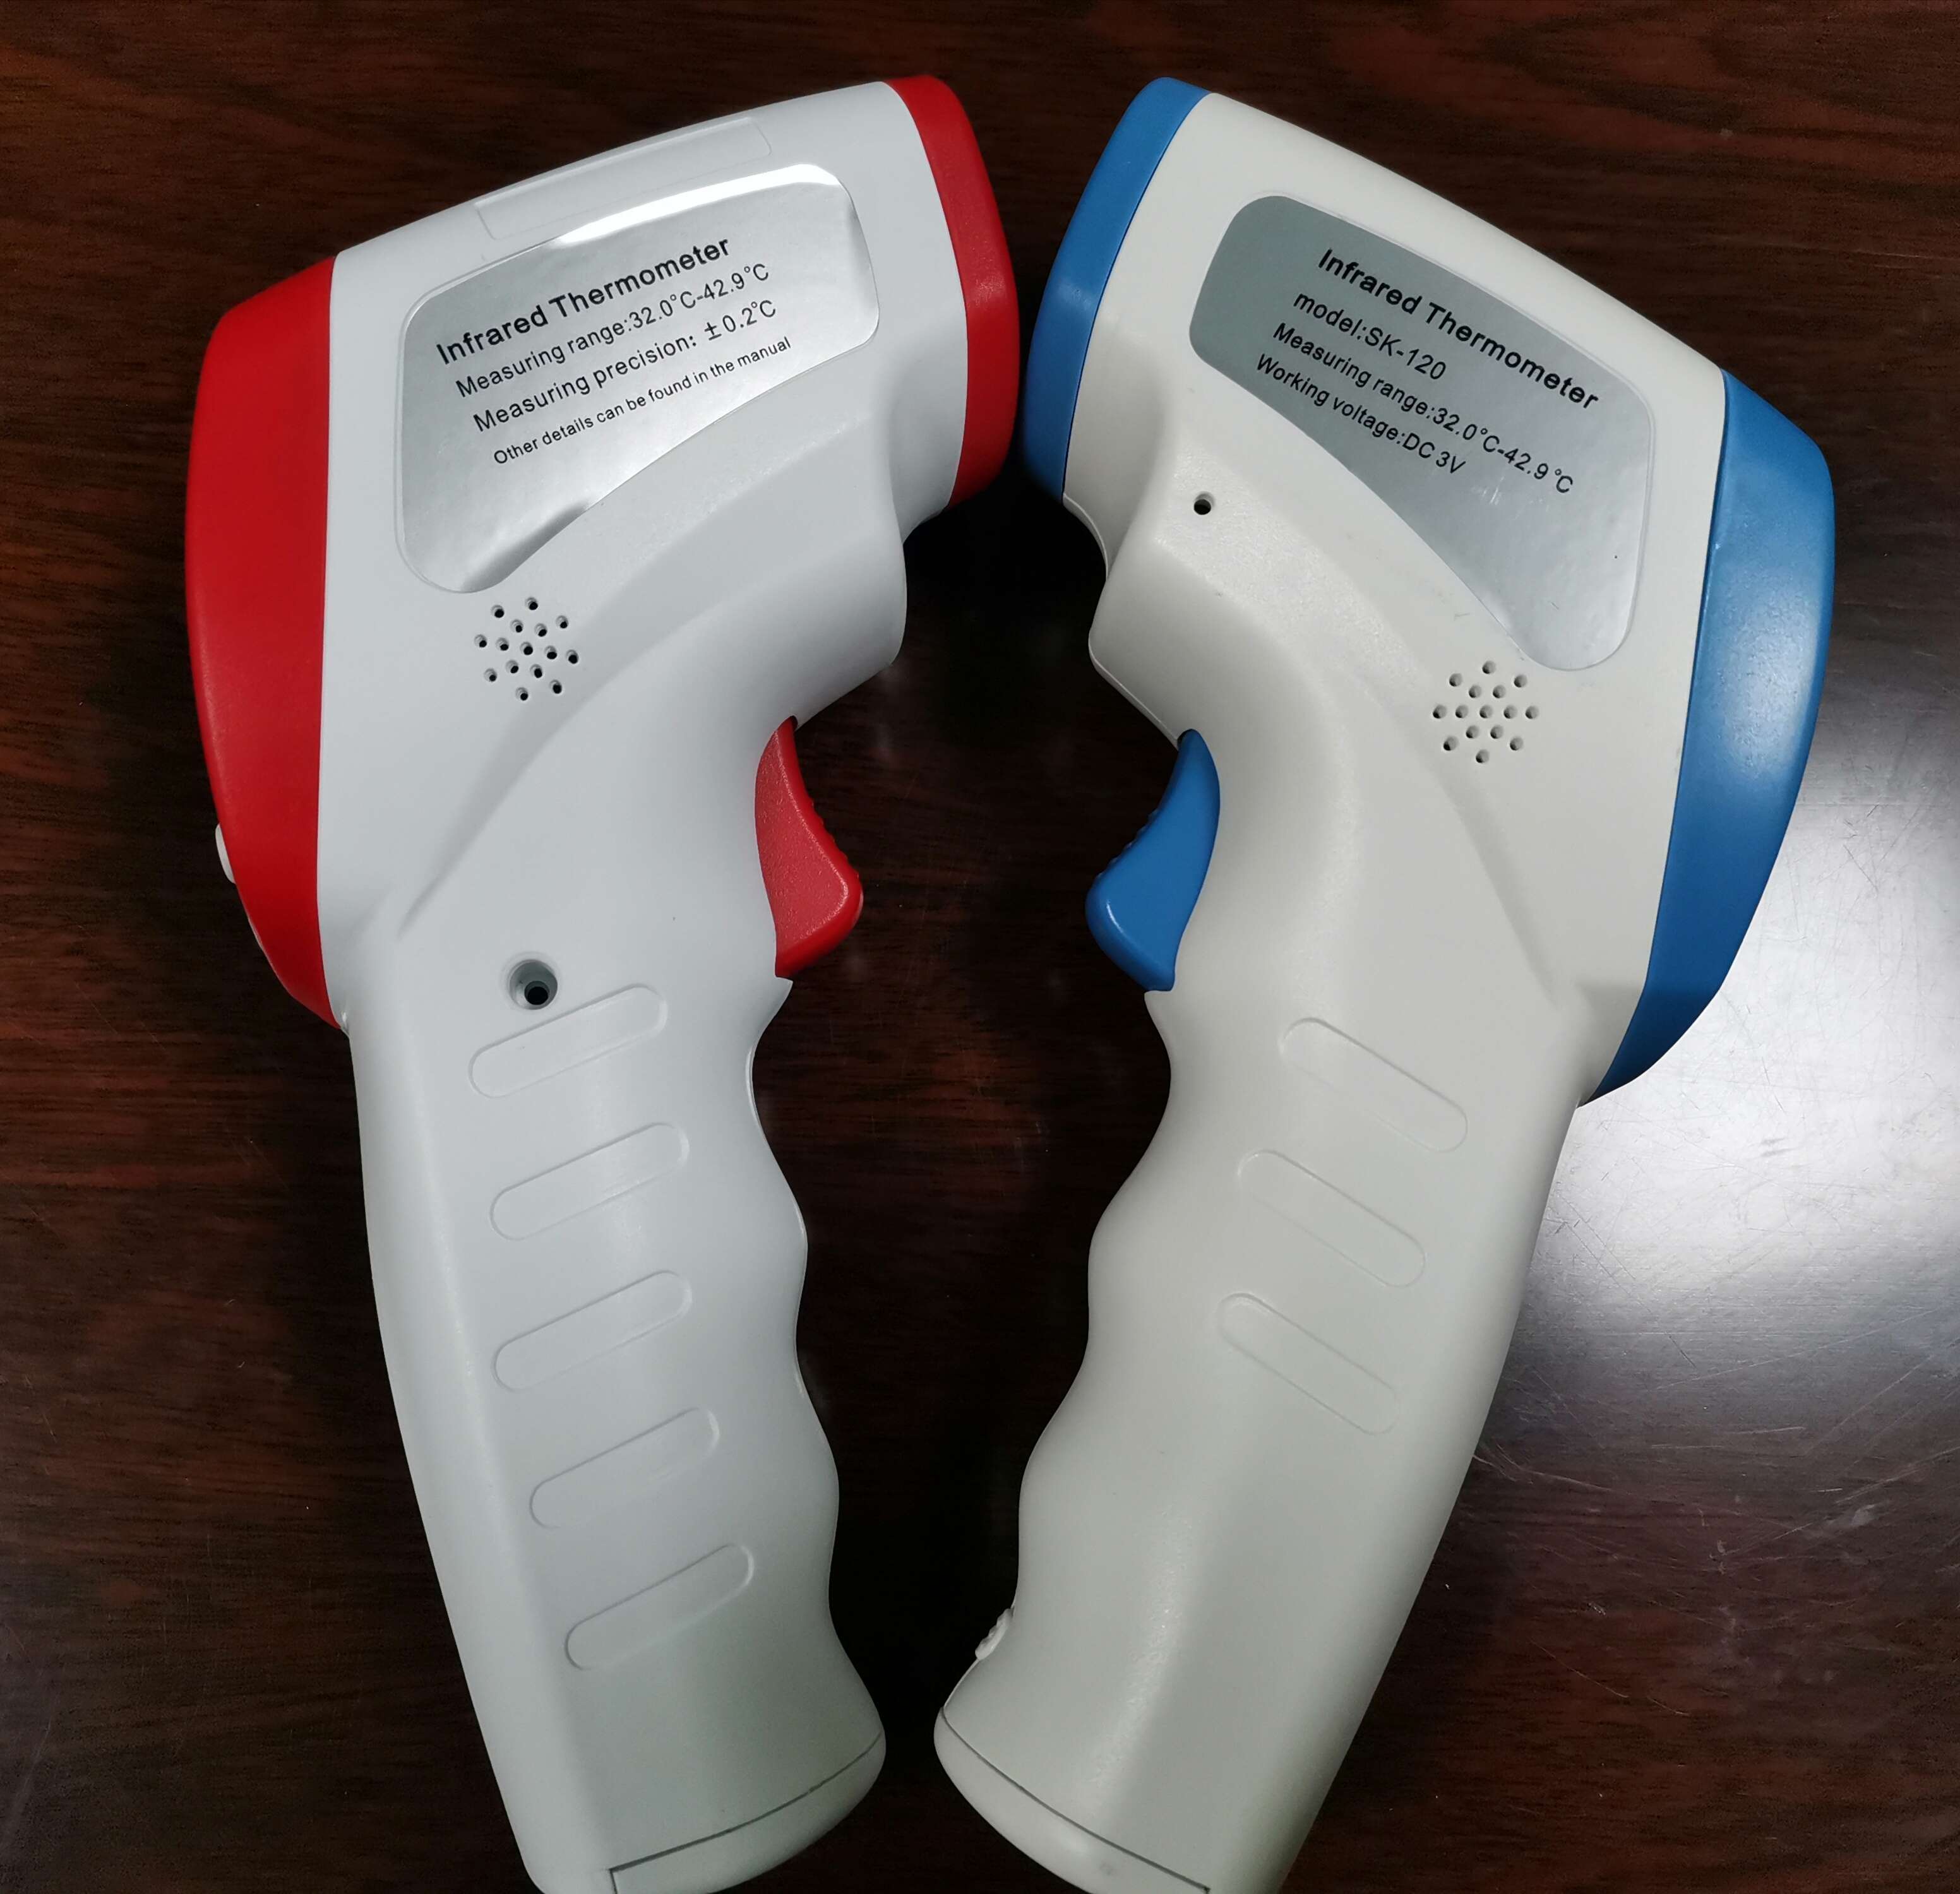 Infrared thermometer Introduction